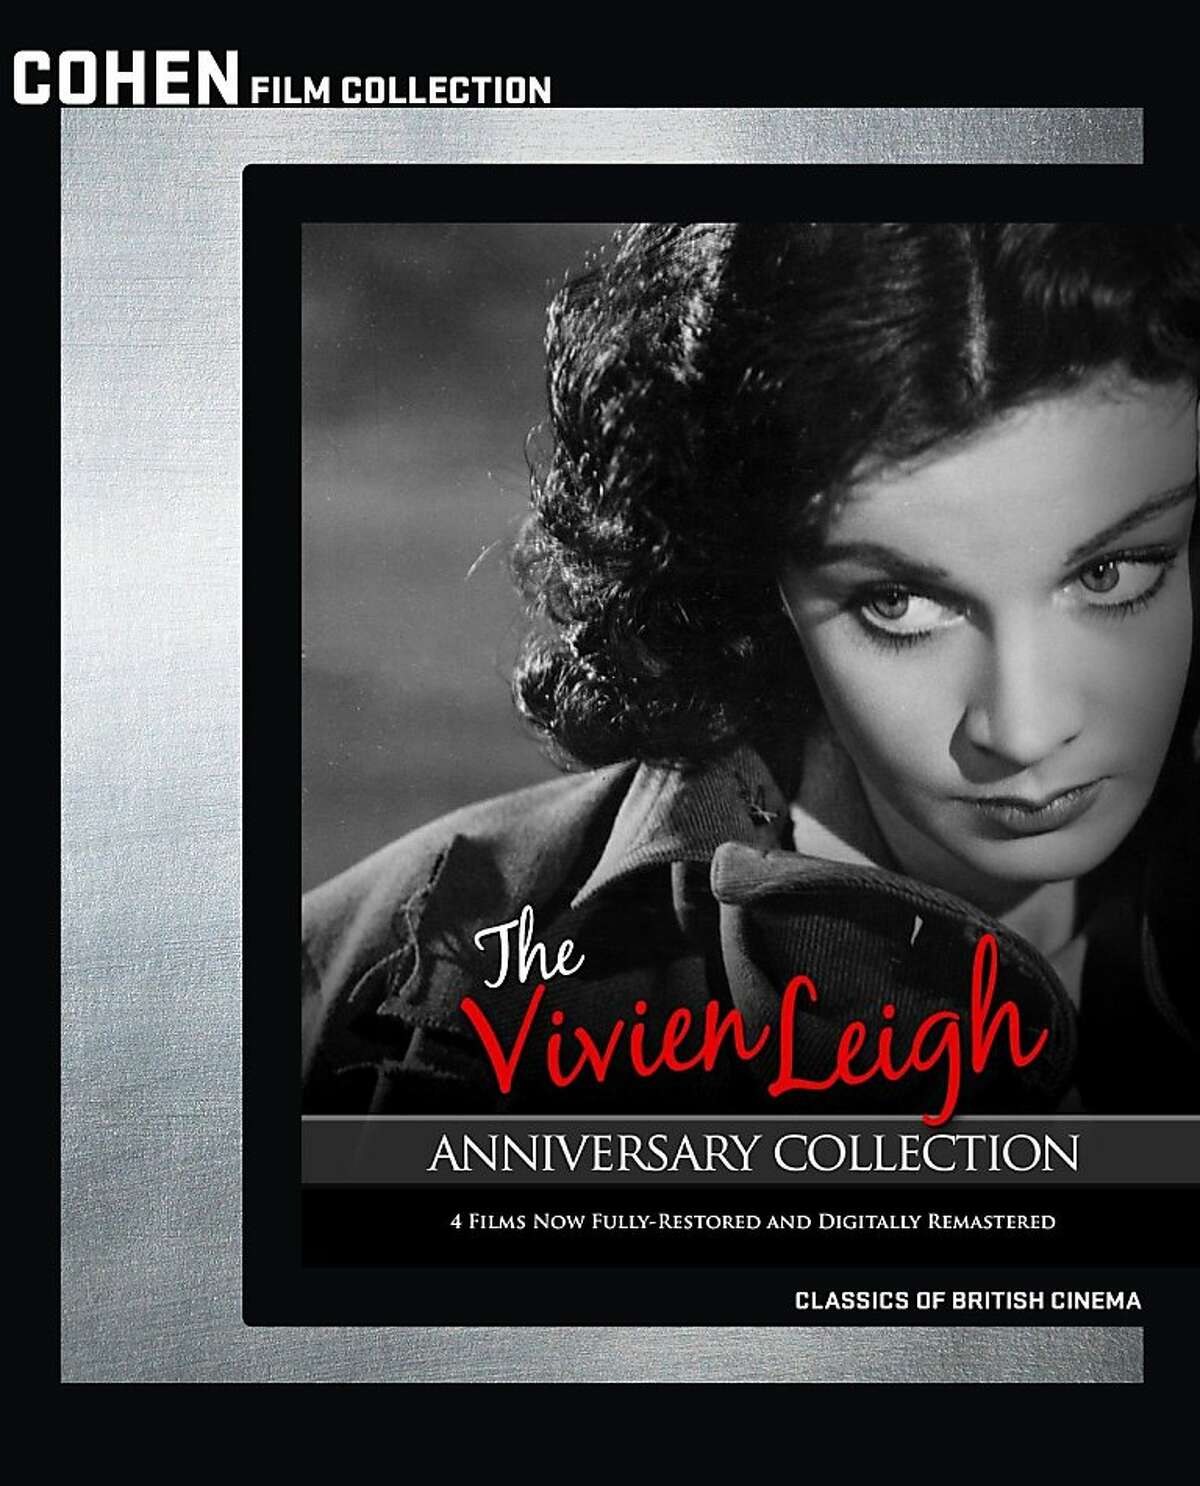 DVD cover: "The Vivien Leigh Anniversary Collection"